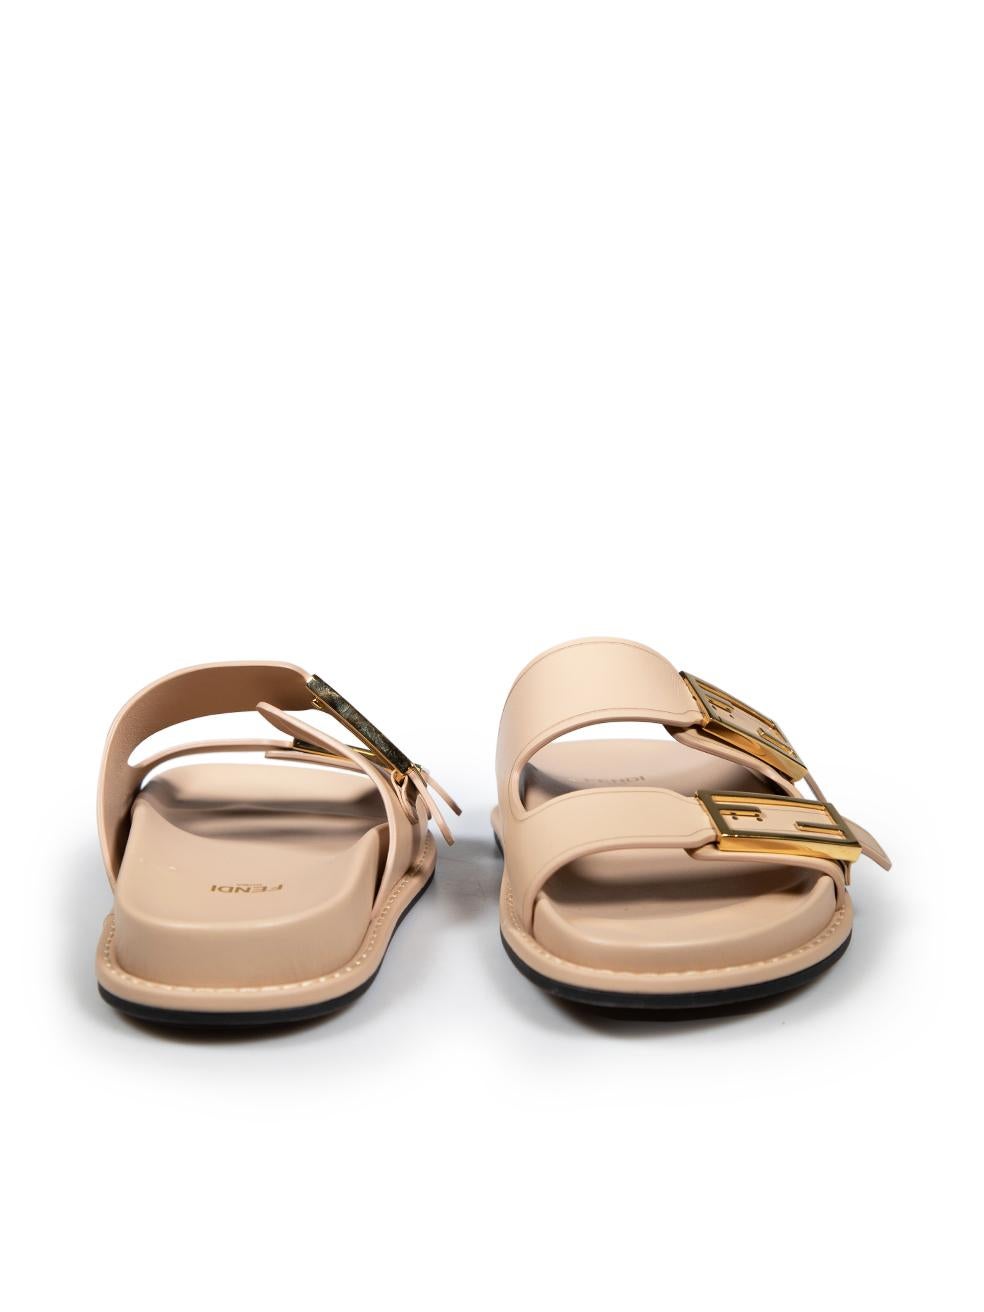 Fendi Beige Leather Feel Buckled Slides Size IT 37 In Good Condition For Sale In London, GB